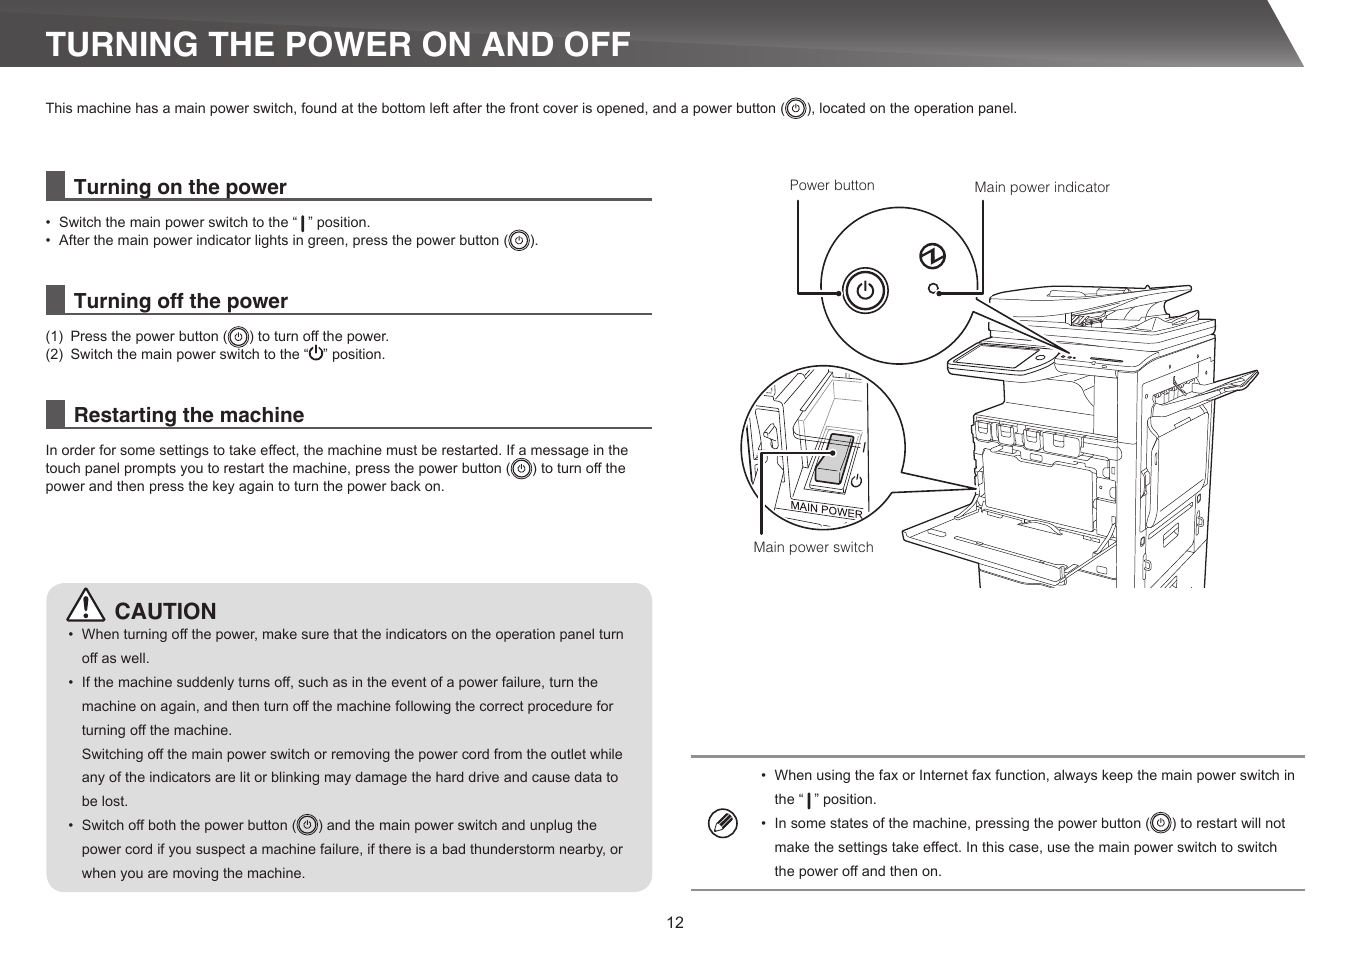 Turning the power on and off, Caution | Sharp MX-5140N User Manual | Page 12 / 28